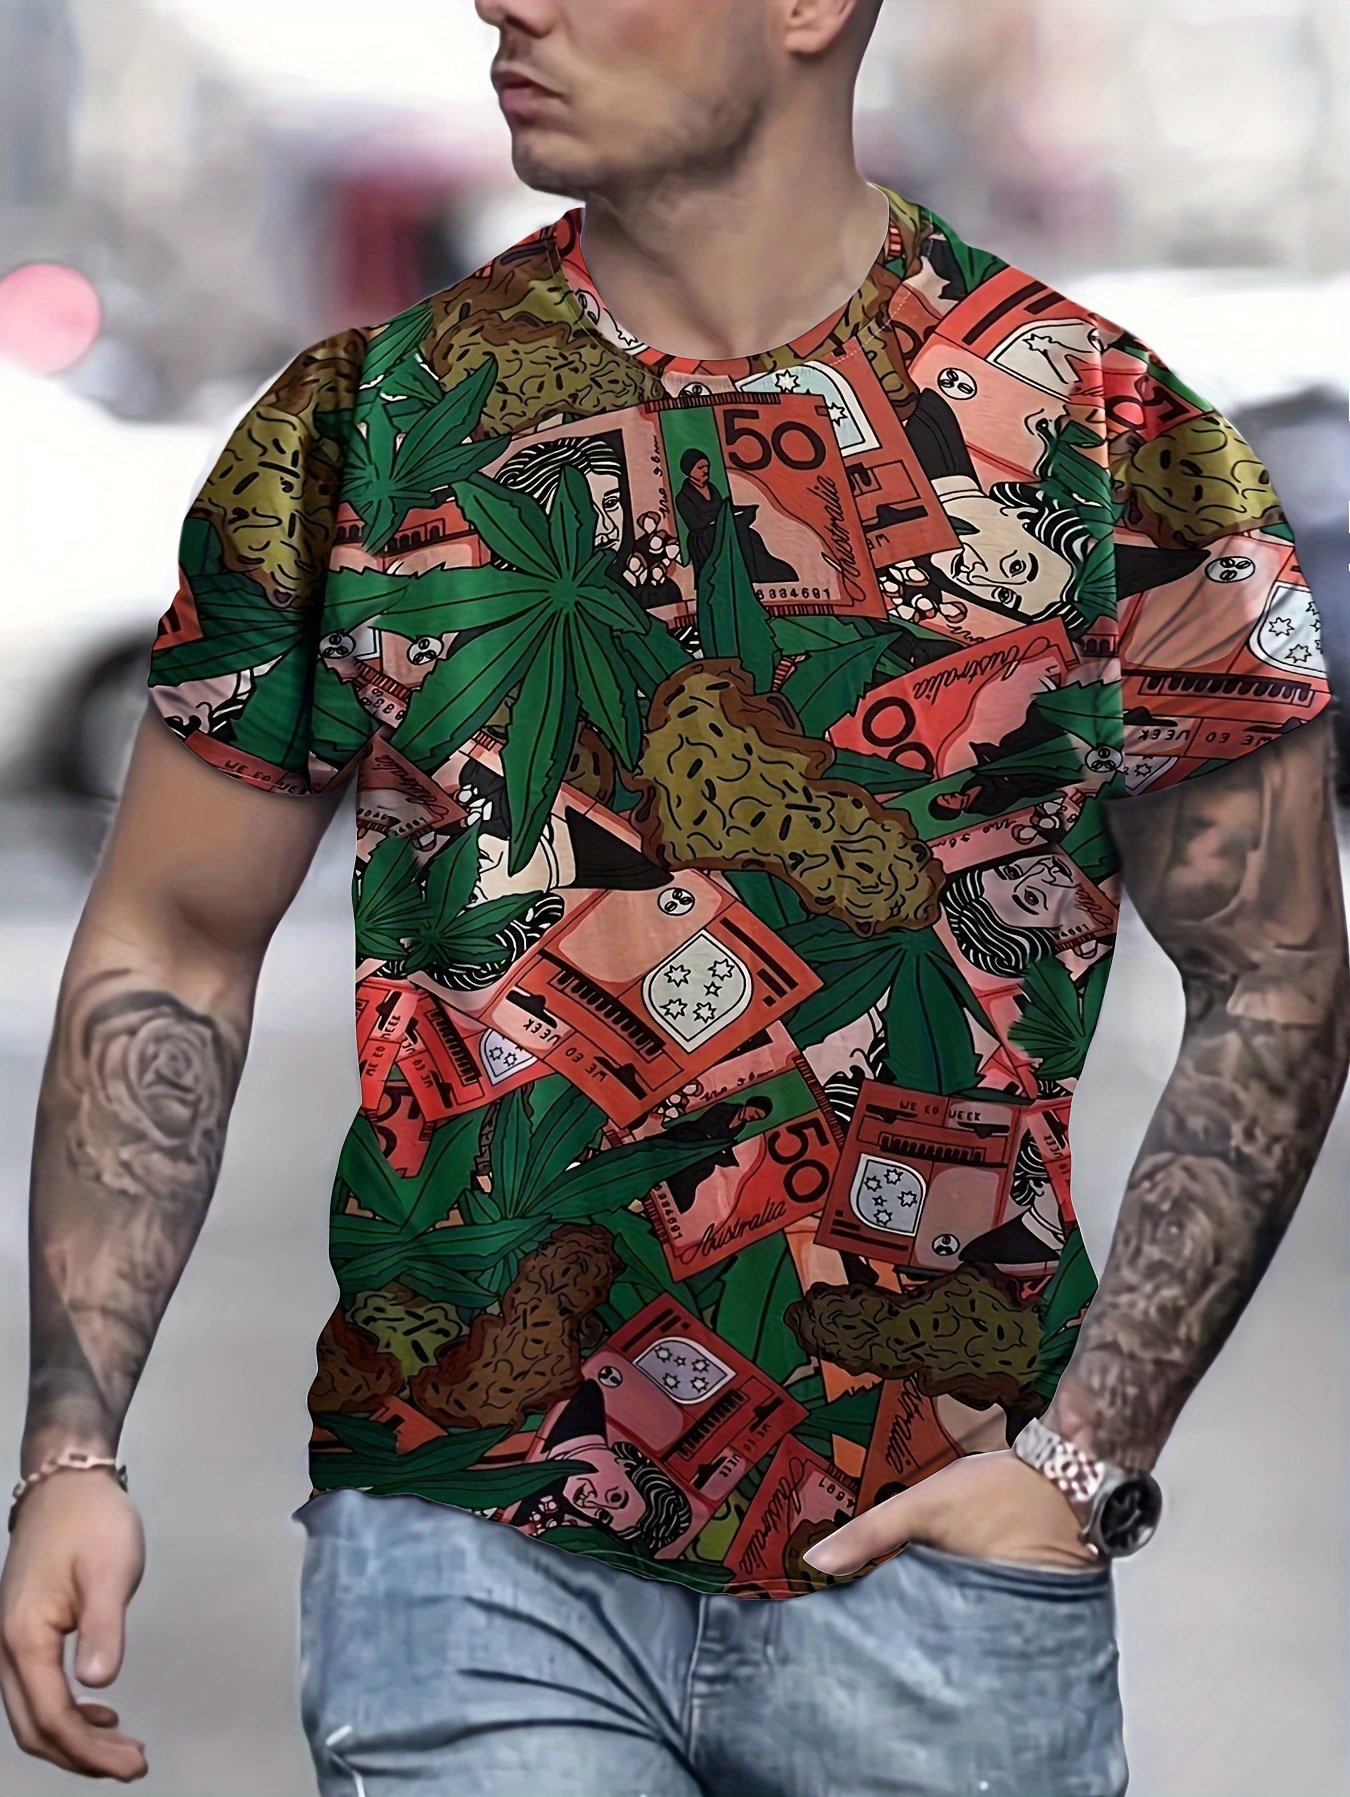 Men's Leaf Printed Big and Tall t-Shirts Short Sleeve Round Neck  Lightweight tee Shirts Summer Outdoor Casual Tops